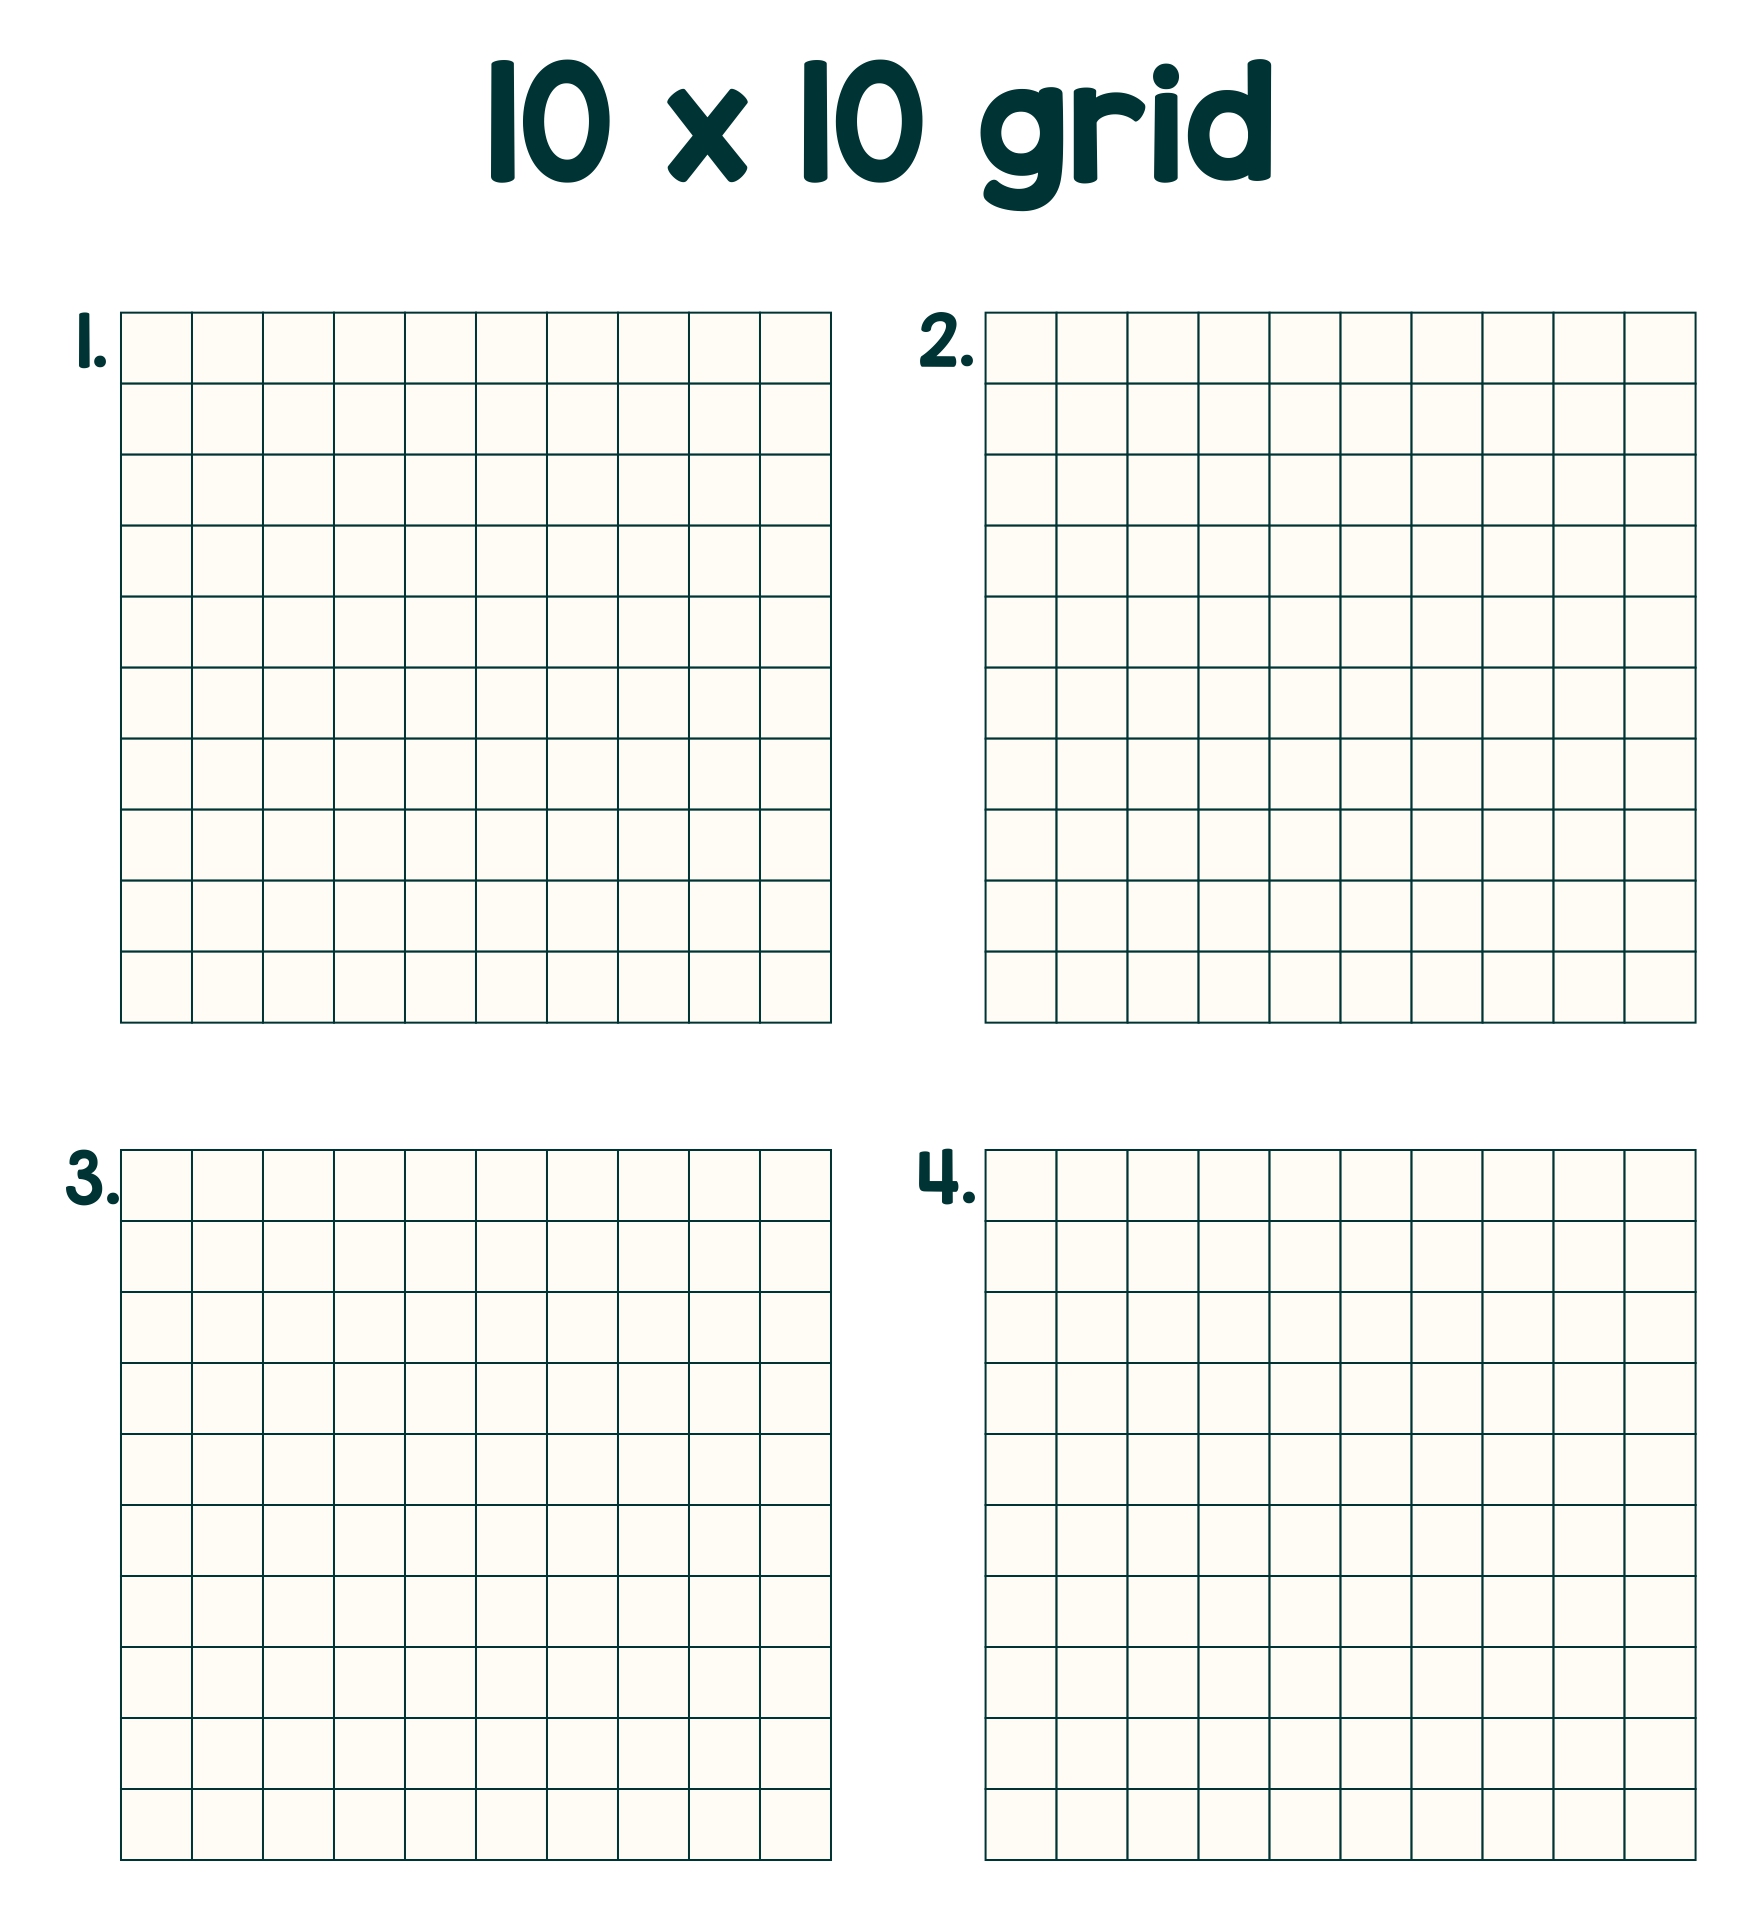 4-best-images-of-10-by-10-grids-printable-blank-100-square-grid-paper-printable-10-x-10